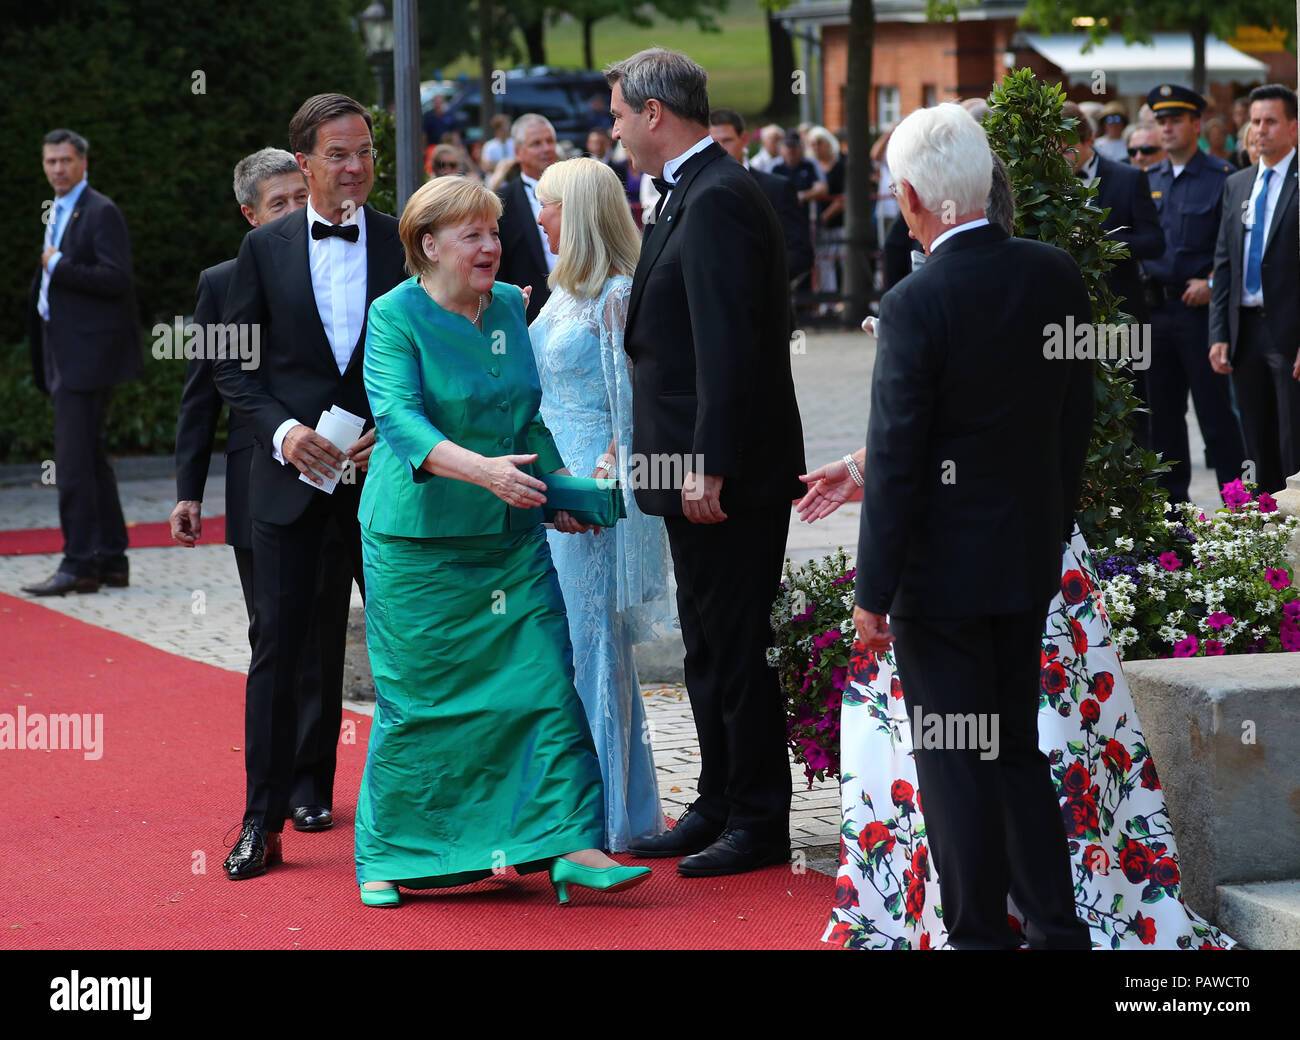 Bayreuth, Germany. 25th July, 2018. Joachim Sauer (l-r), Dutch Prime Minister Marc Rutte, German Chancellor Angela Merkel, Karin Soeder and Bavarian Minister President Markus Soeder, Bayreuth's mayor Brigitte Merk-Erbe and her husband Thomas greet each other at the festival hall. The Richard-Wagner-Festivals 2018 start with a new performance of Lohengrin'. From 25 July to 29 August, Wagner afficiondos make the trek to the 'Green Hill' to experience the composer's operas. Credit: Daniel Karmann/dpa/Alamy Live News Credit: dpa picture alliance/Alamy Live News Credit: dpa picture alliance/Alamy L Stock Photo